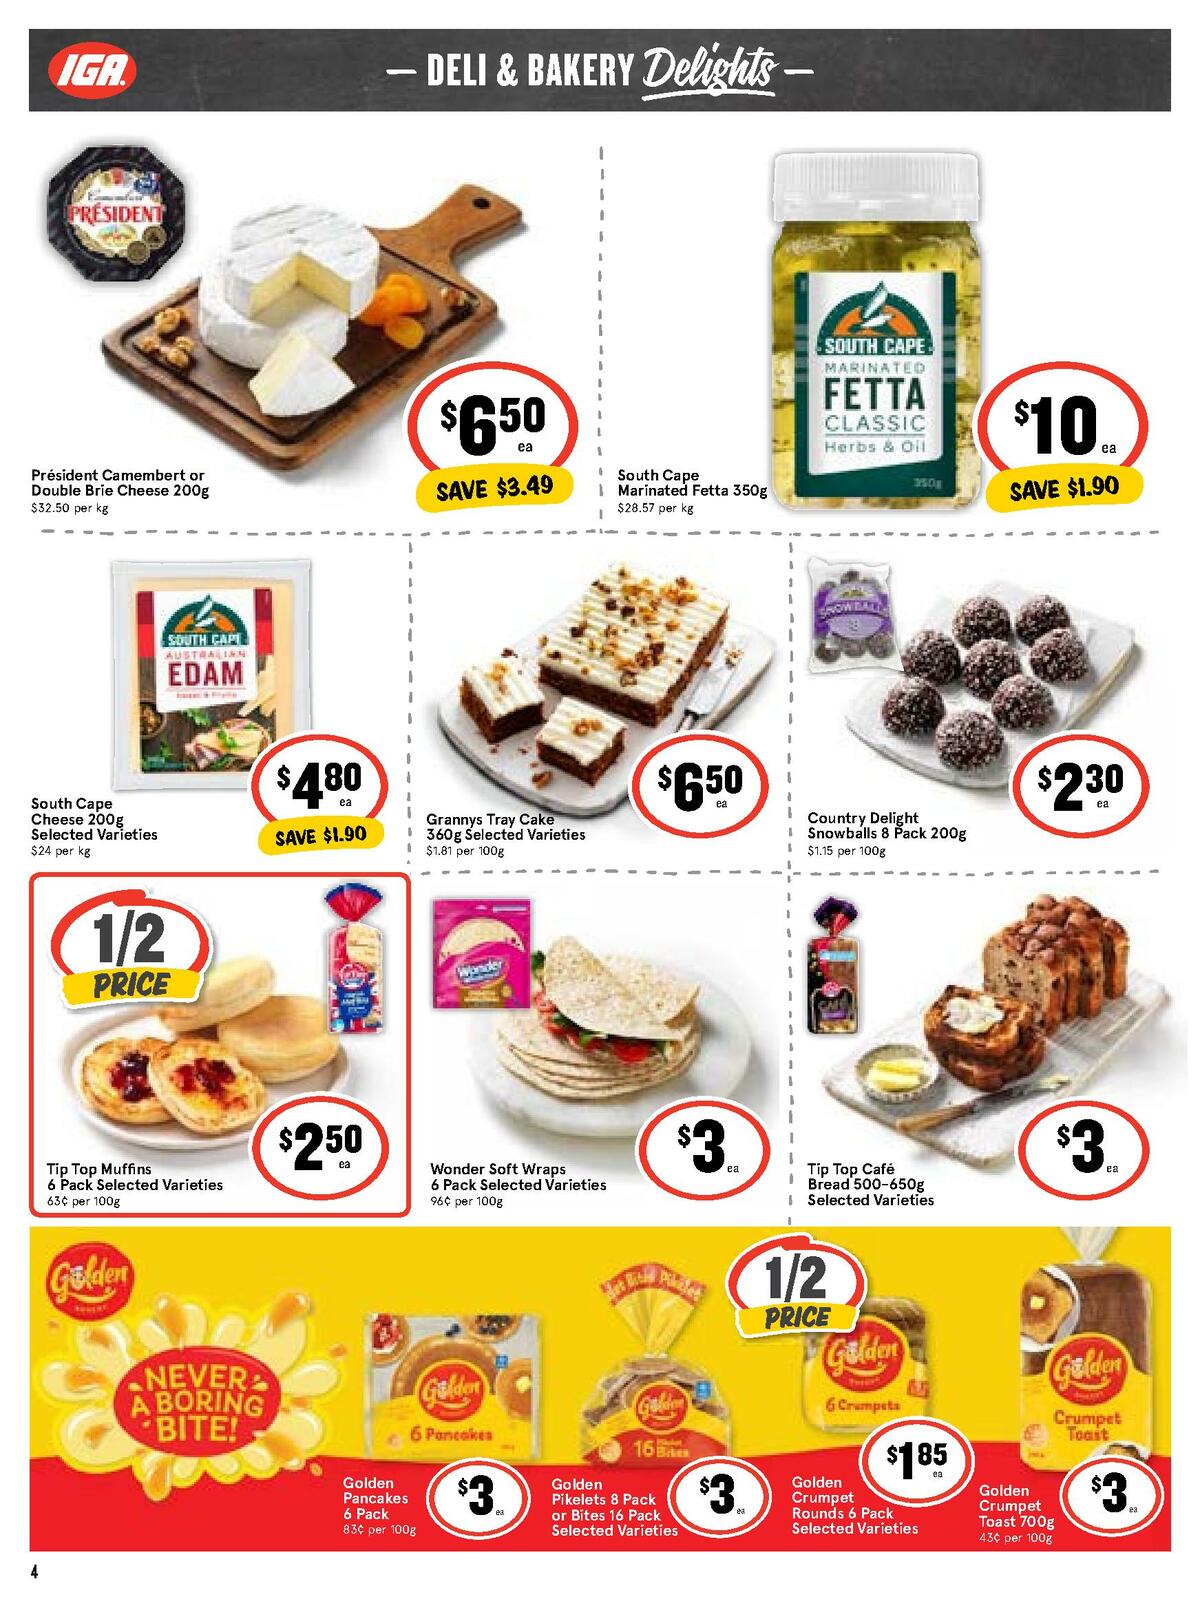 IGA Catalogues from 8 July